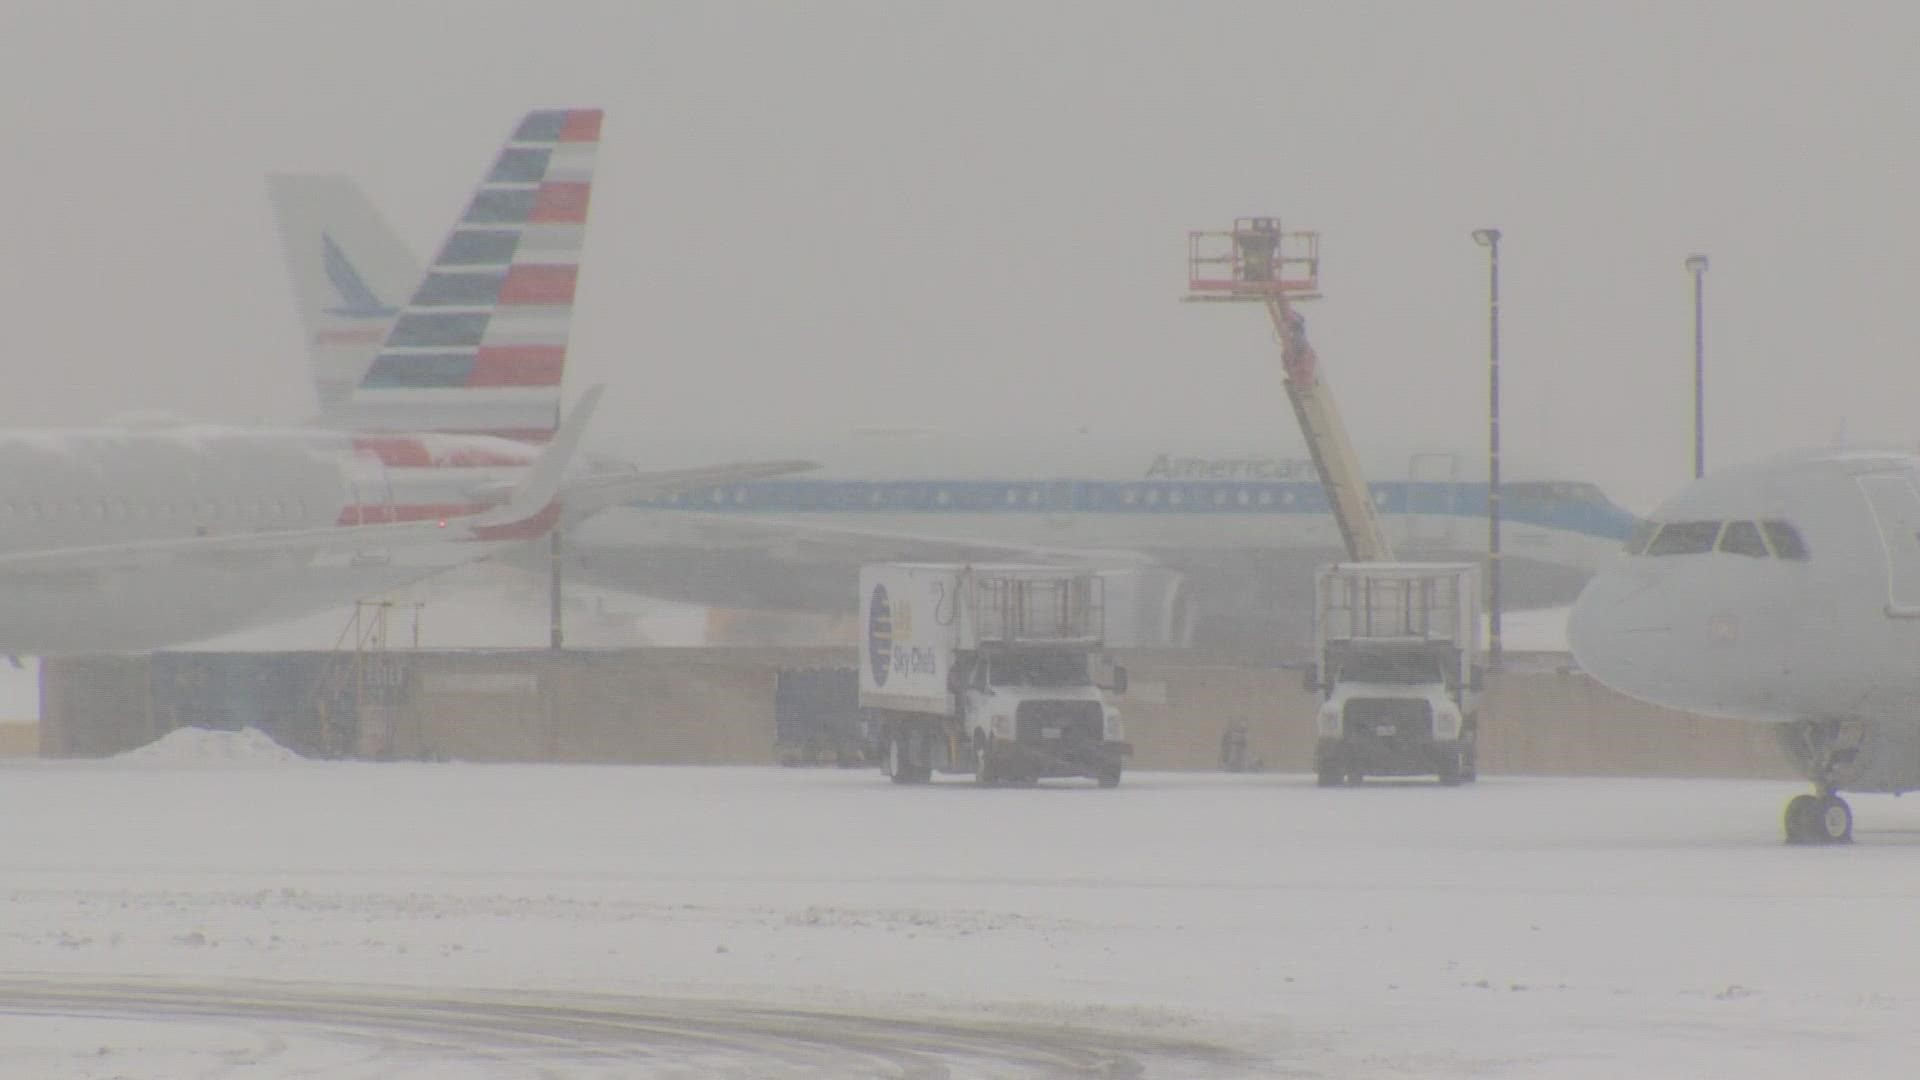 DFW Airport suspended all operations for several hours Thursday morning as a winter storm rolled through North Texas.